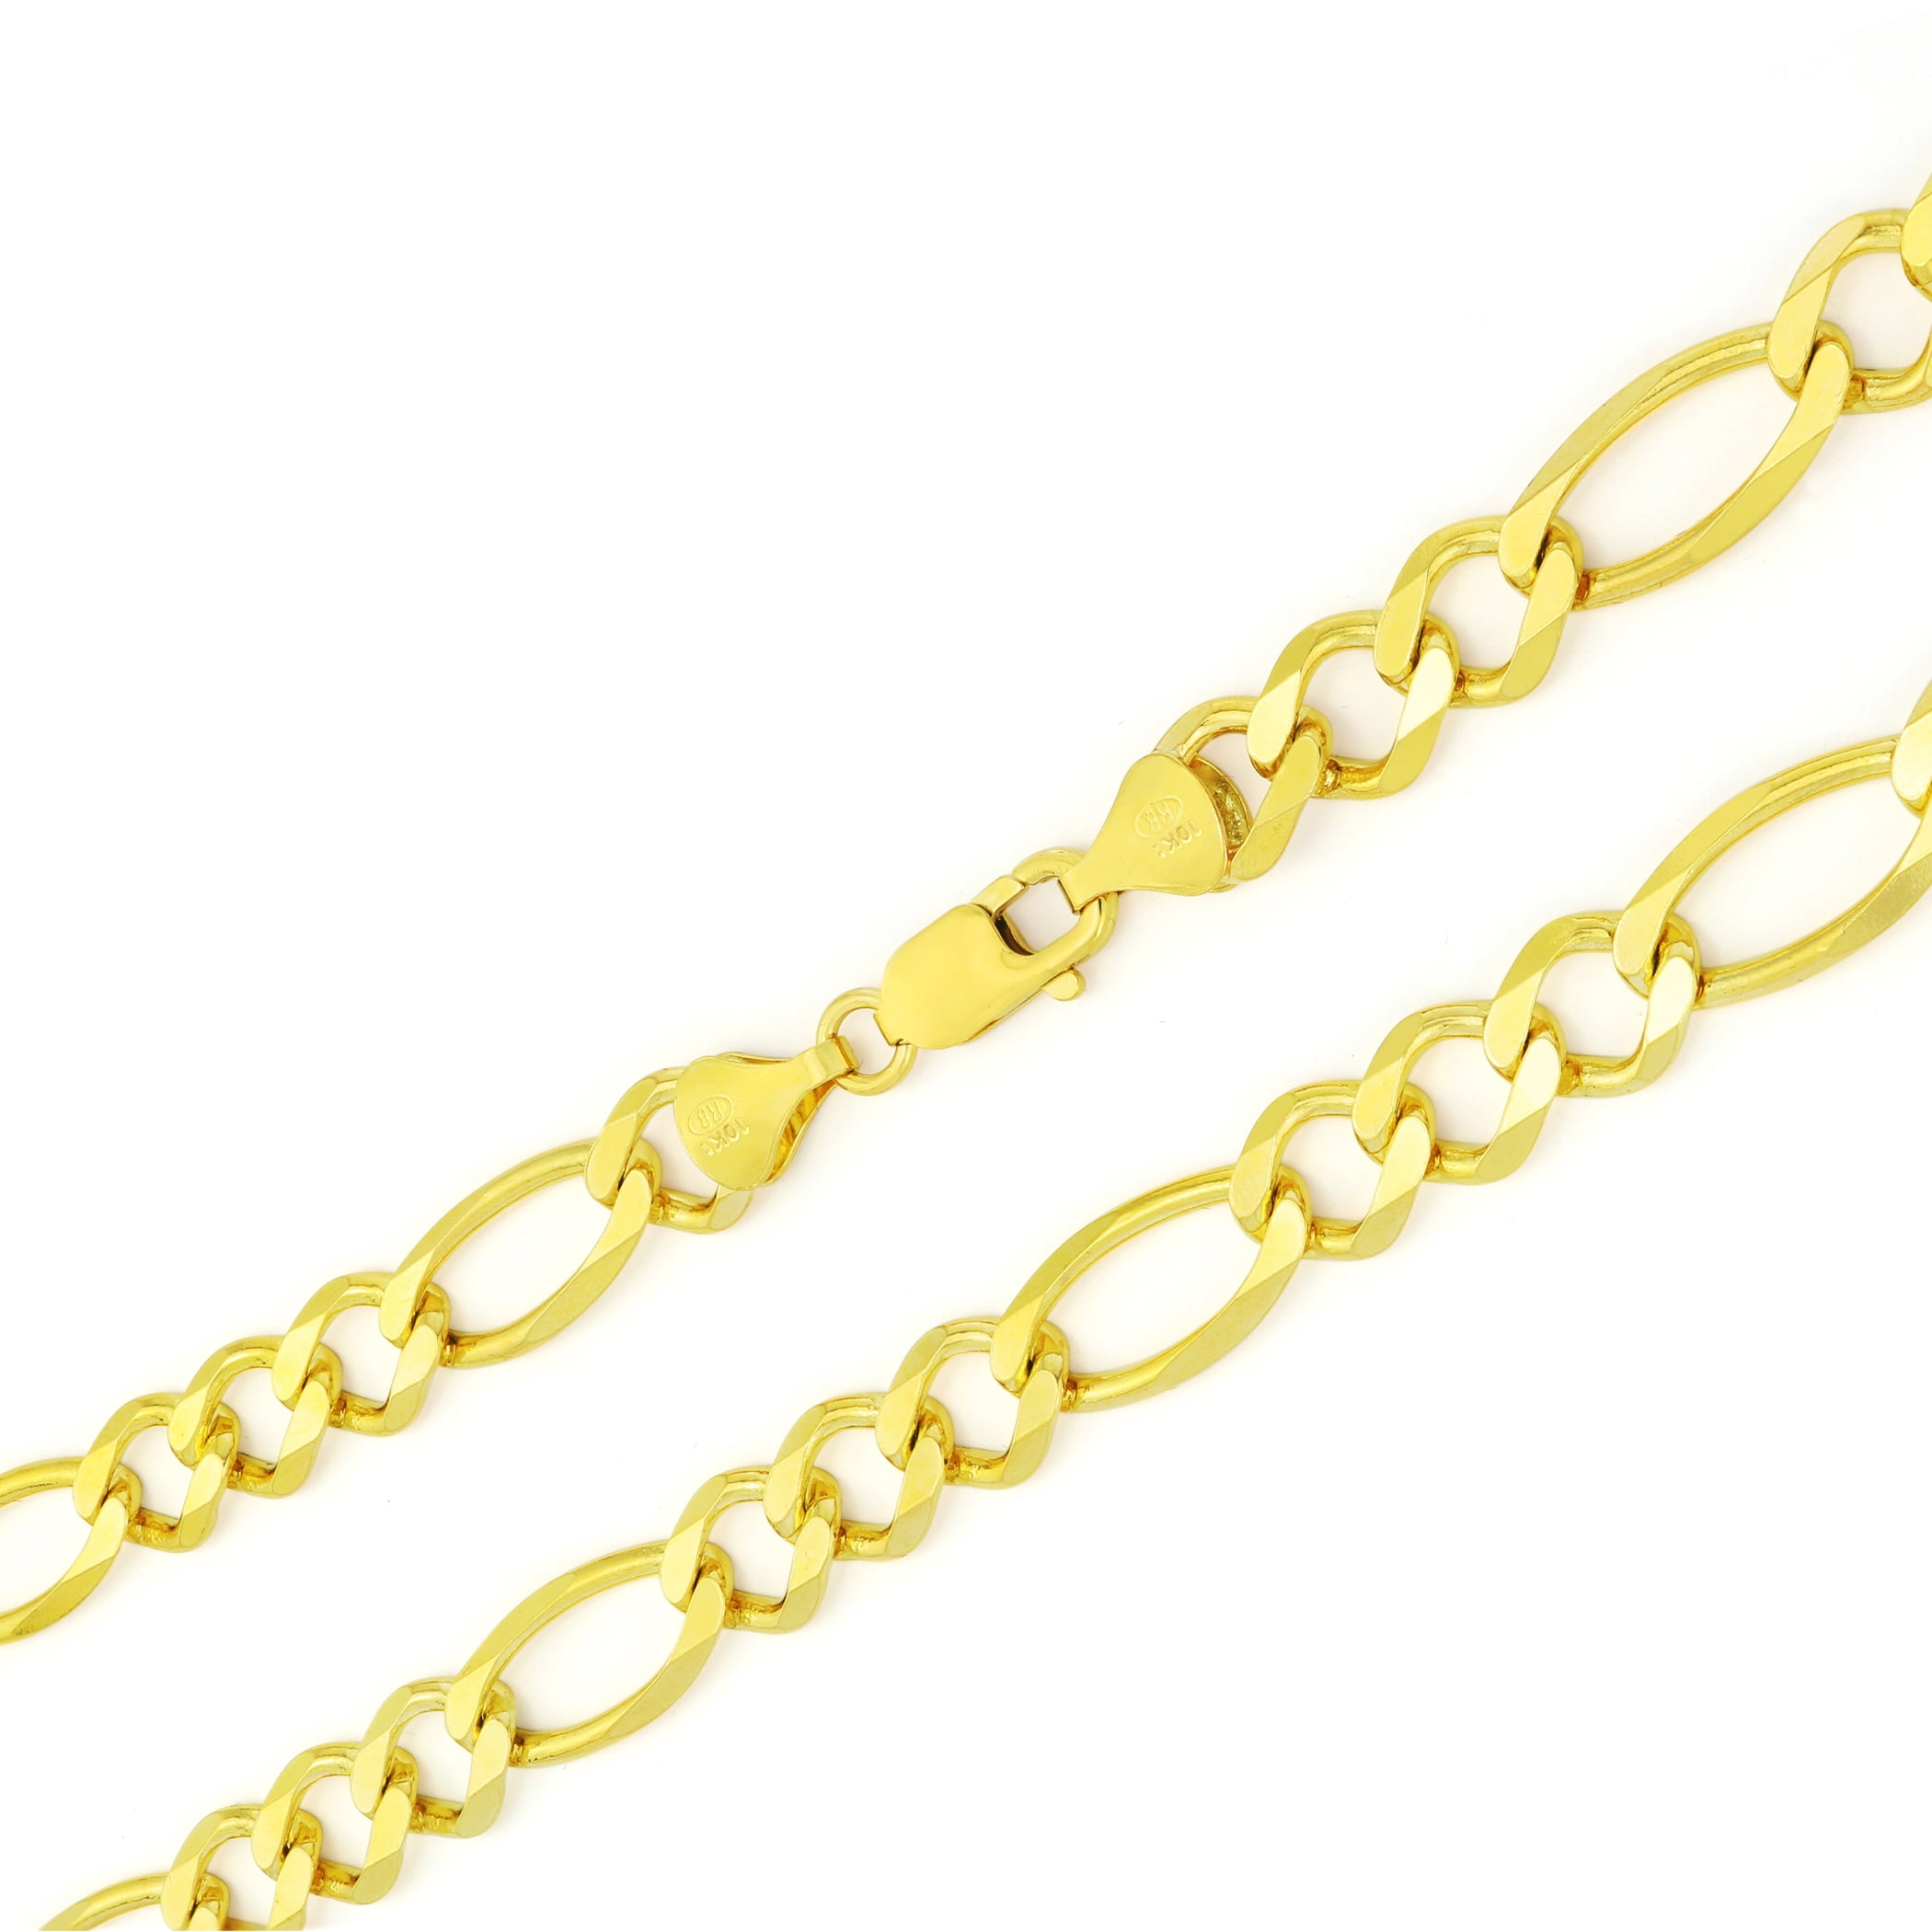 10K REAL YELLOW GOLD 2mm 30" 9.5mm Figaro Chain Pendant Necklace Bracelet 7" 